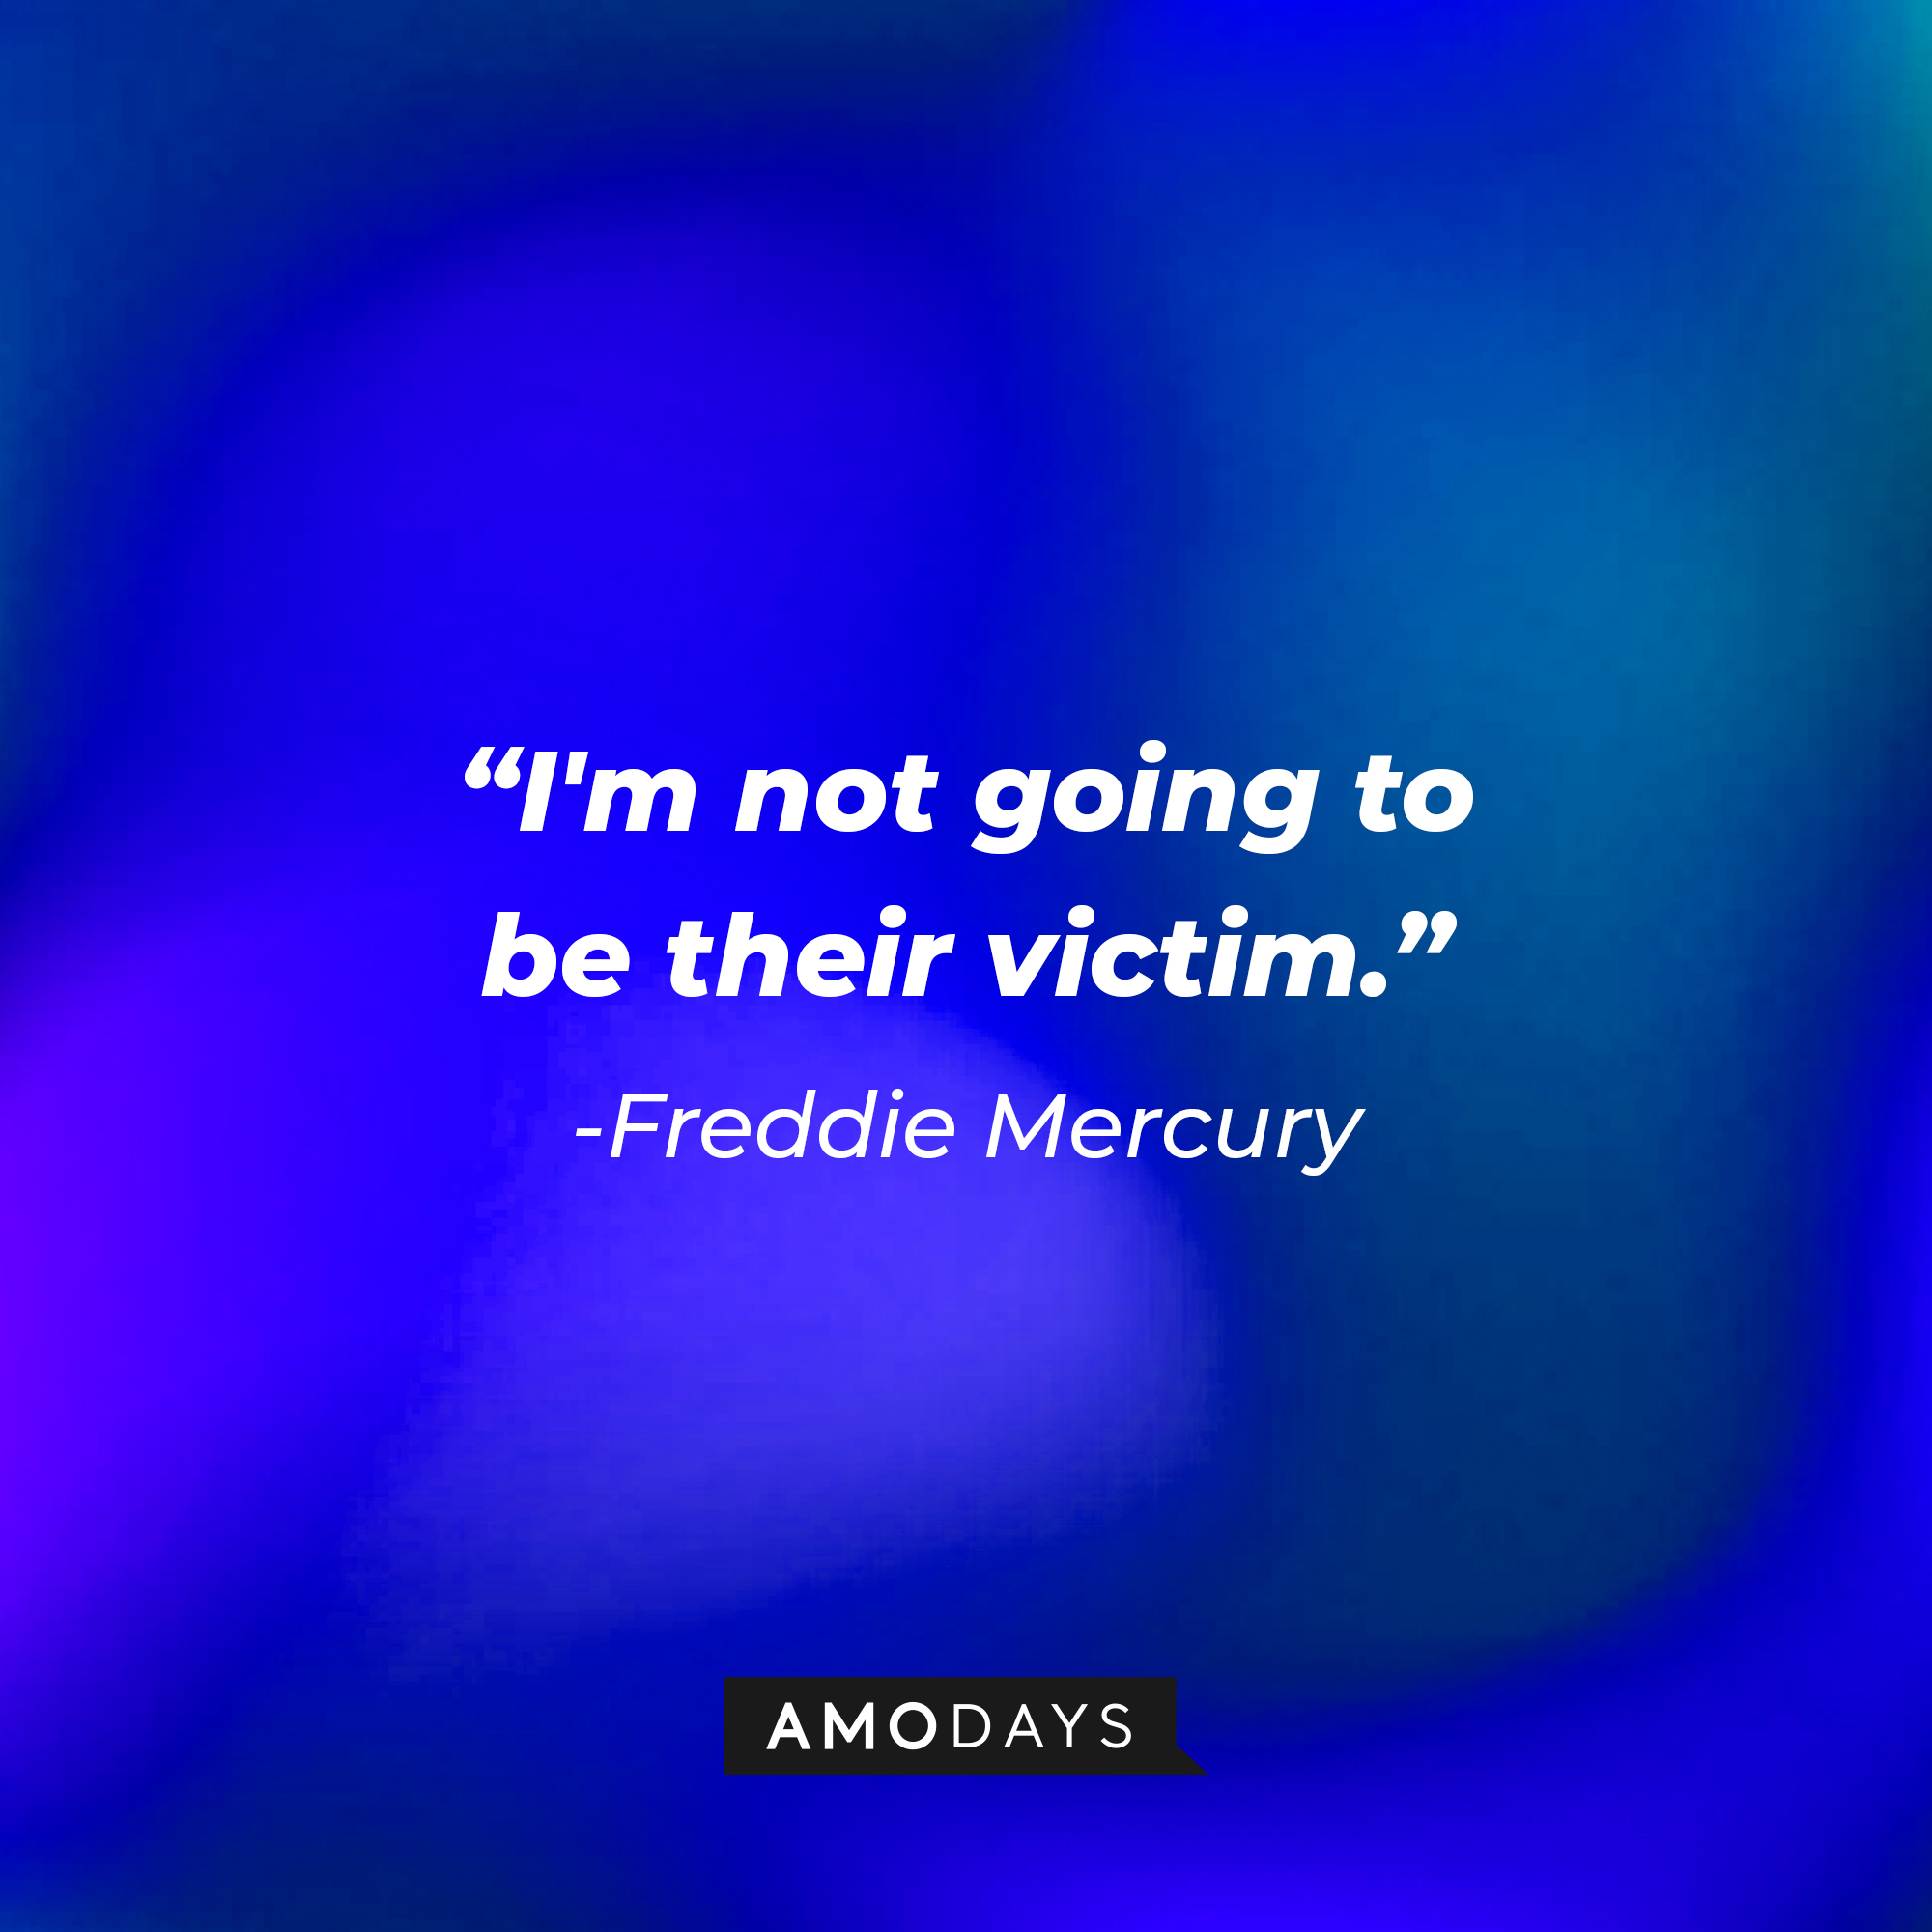 Freddie Mercury with his quote: "I'm not going to be their victim." | Source: Amodays